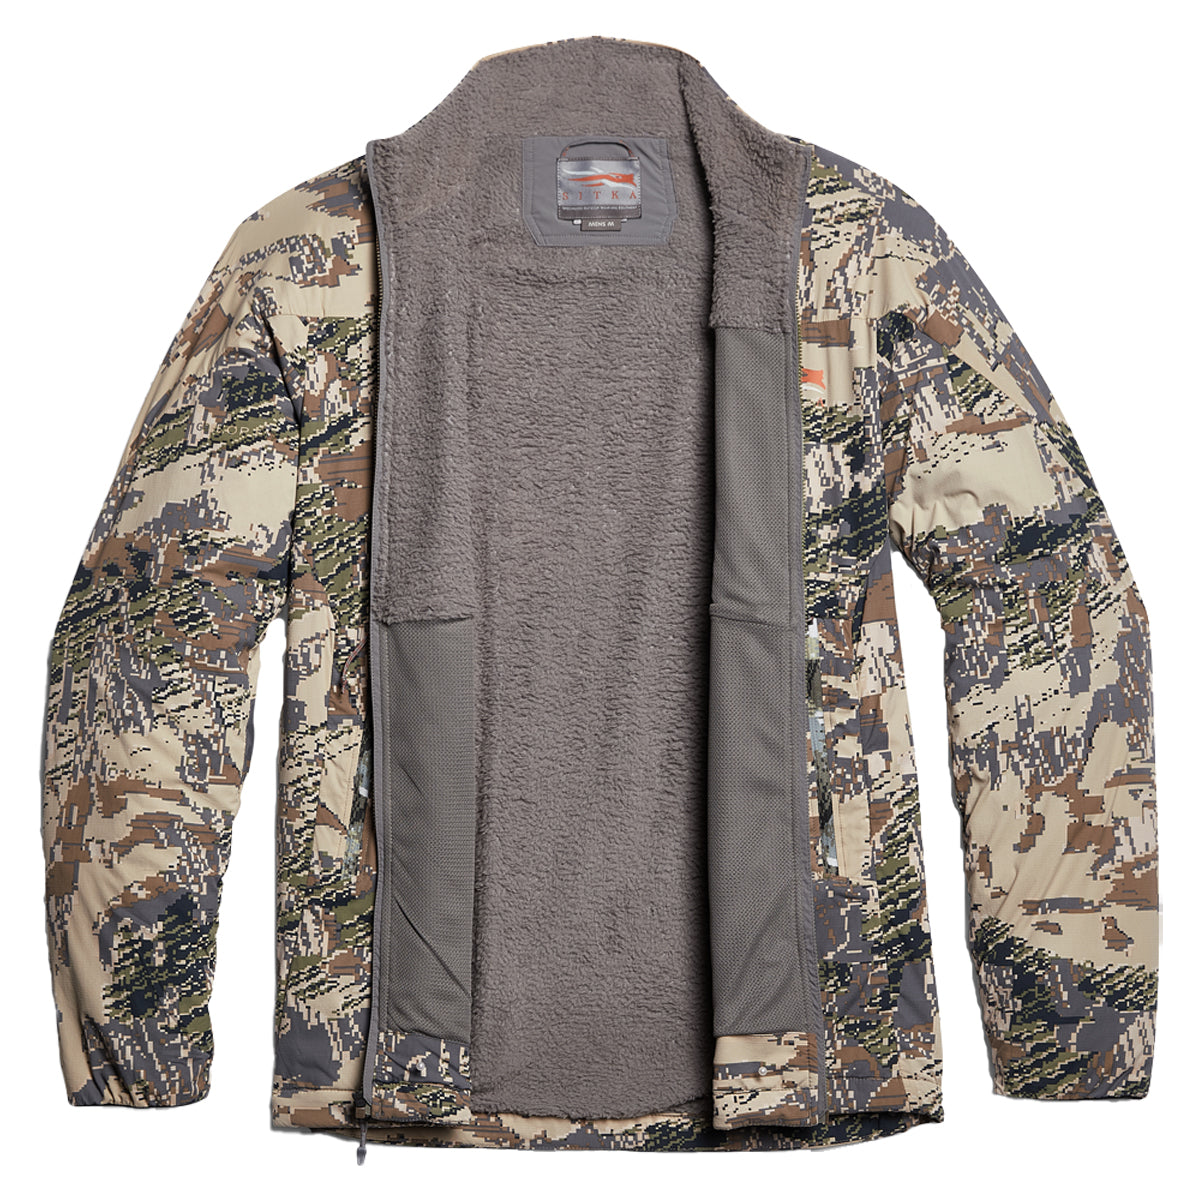 Sitka Men's Ambient Jacket in Optifade Open Country by GOHUNT | Sitka - GOHUNT Shop